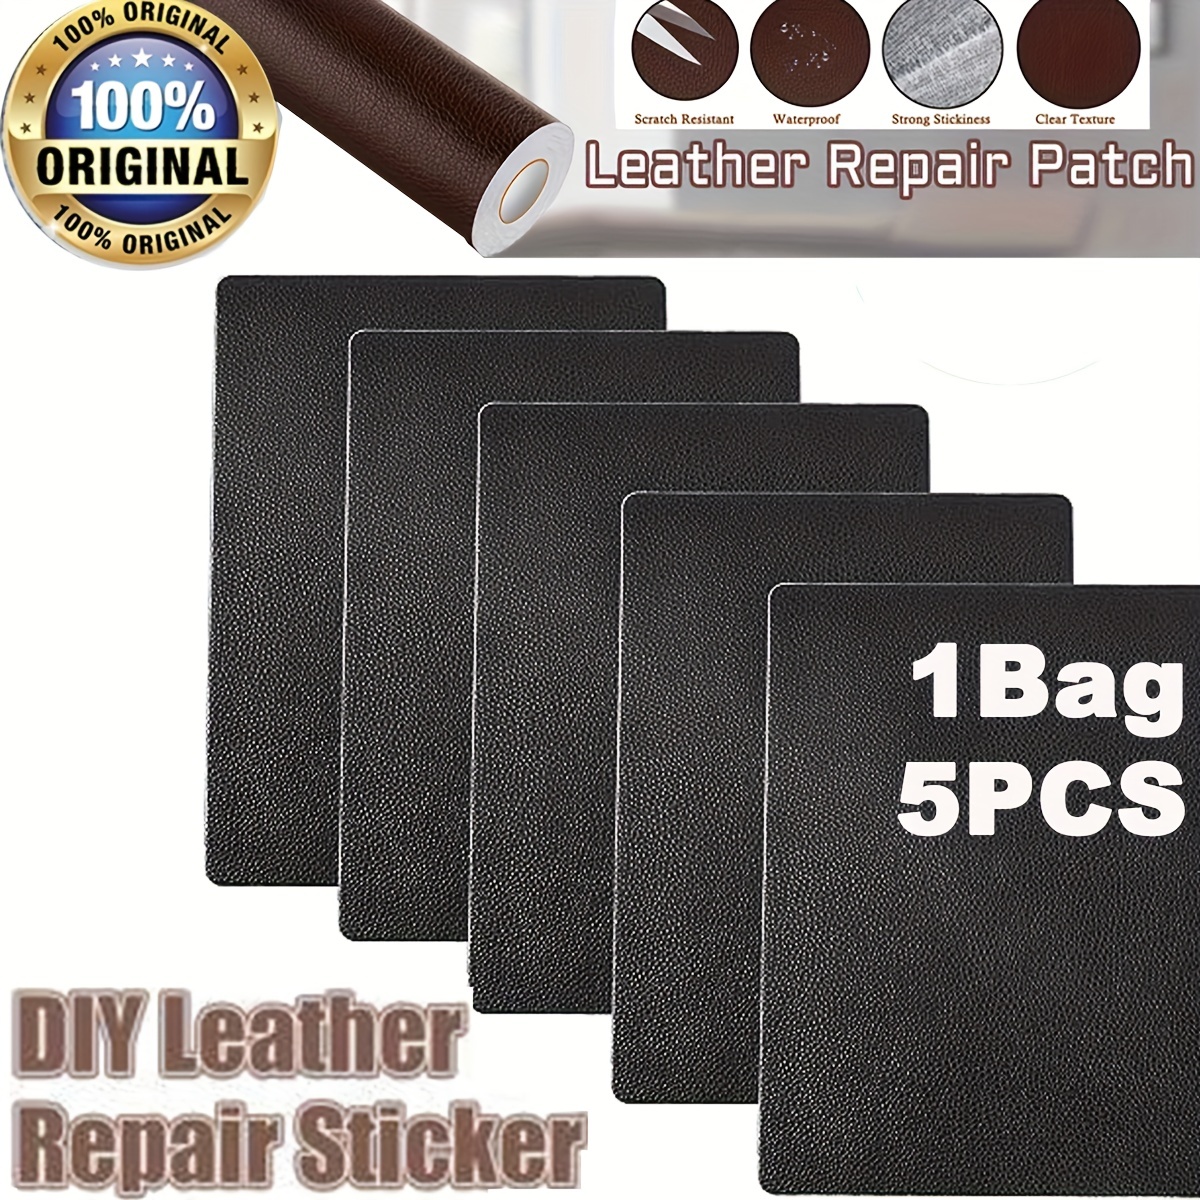 Leather Repair Patch(black 5pcs), Leather Patch Kit, Self Adhesive